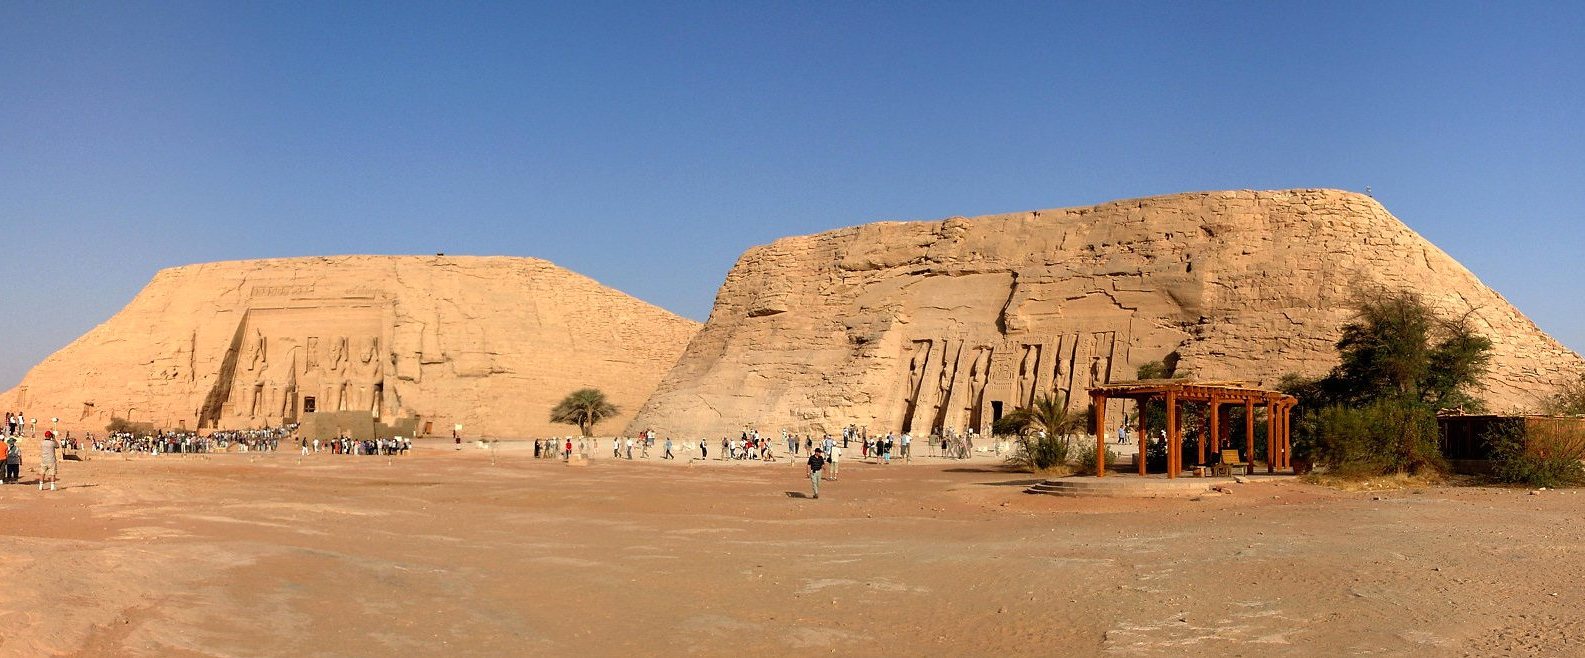 Abu Simbel - Great Temple of Ramesses II (left) and Small Temple of Nefertari (right)